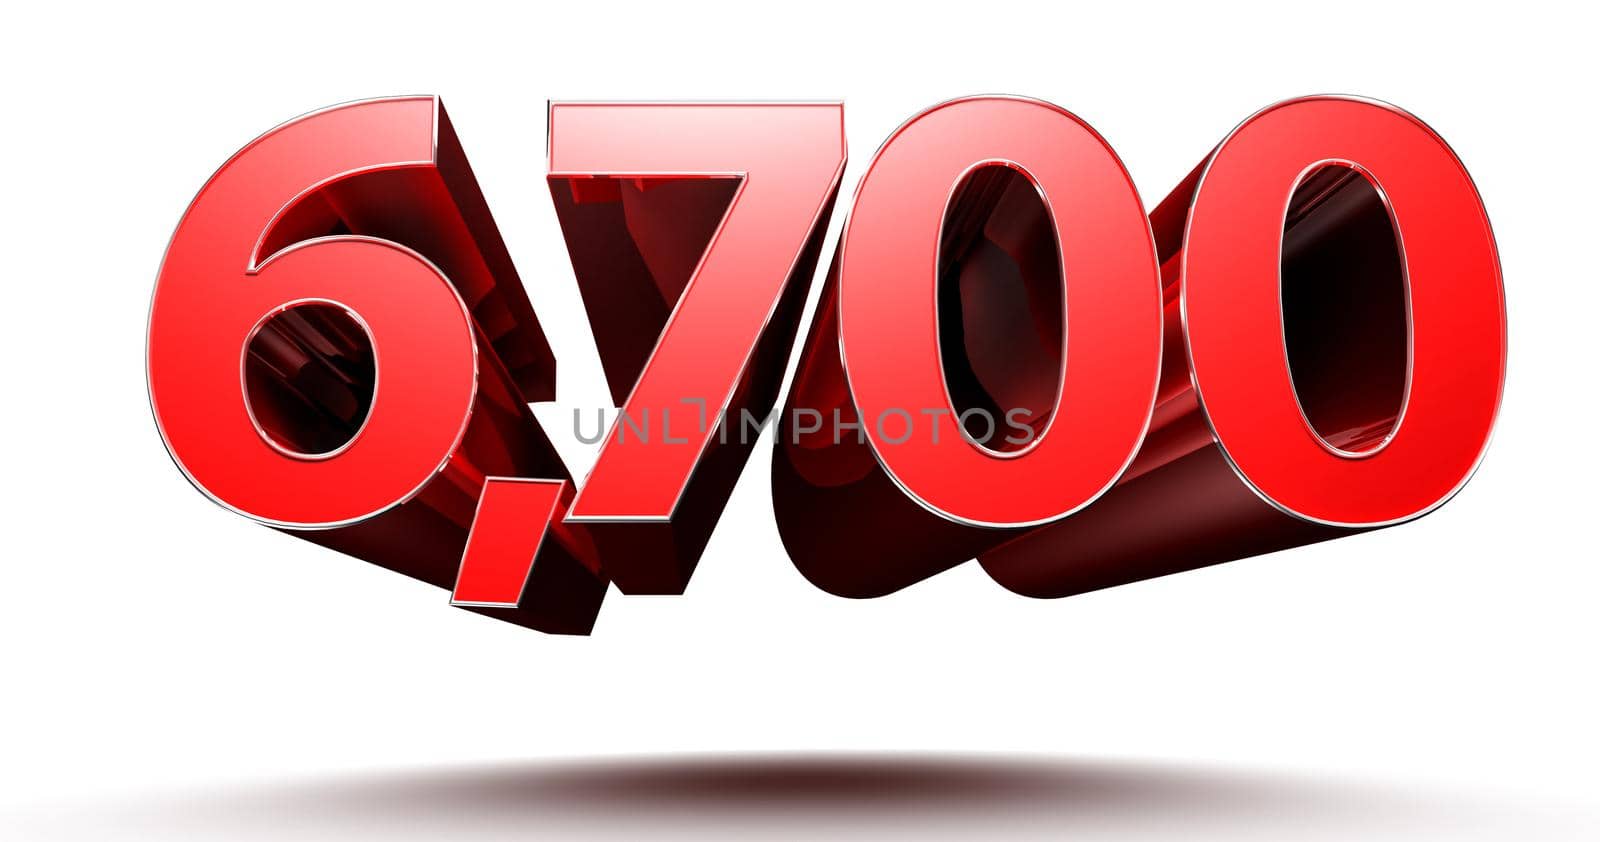 3D illustration number 6700 on white background with clipping path.